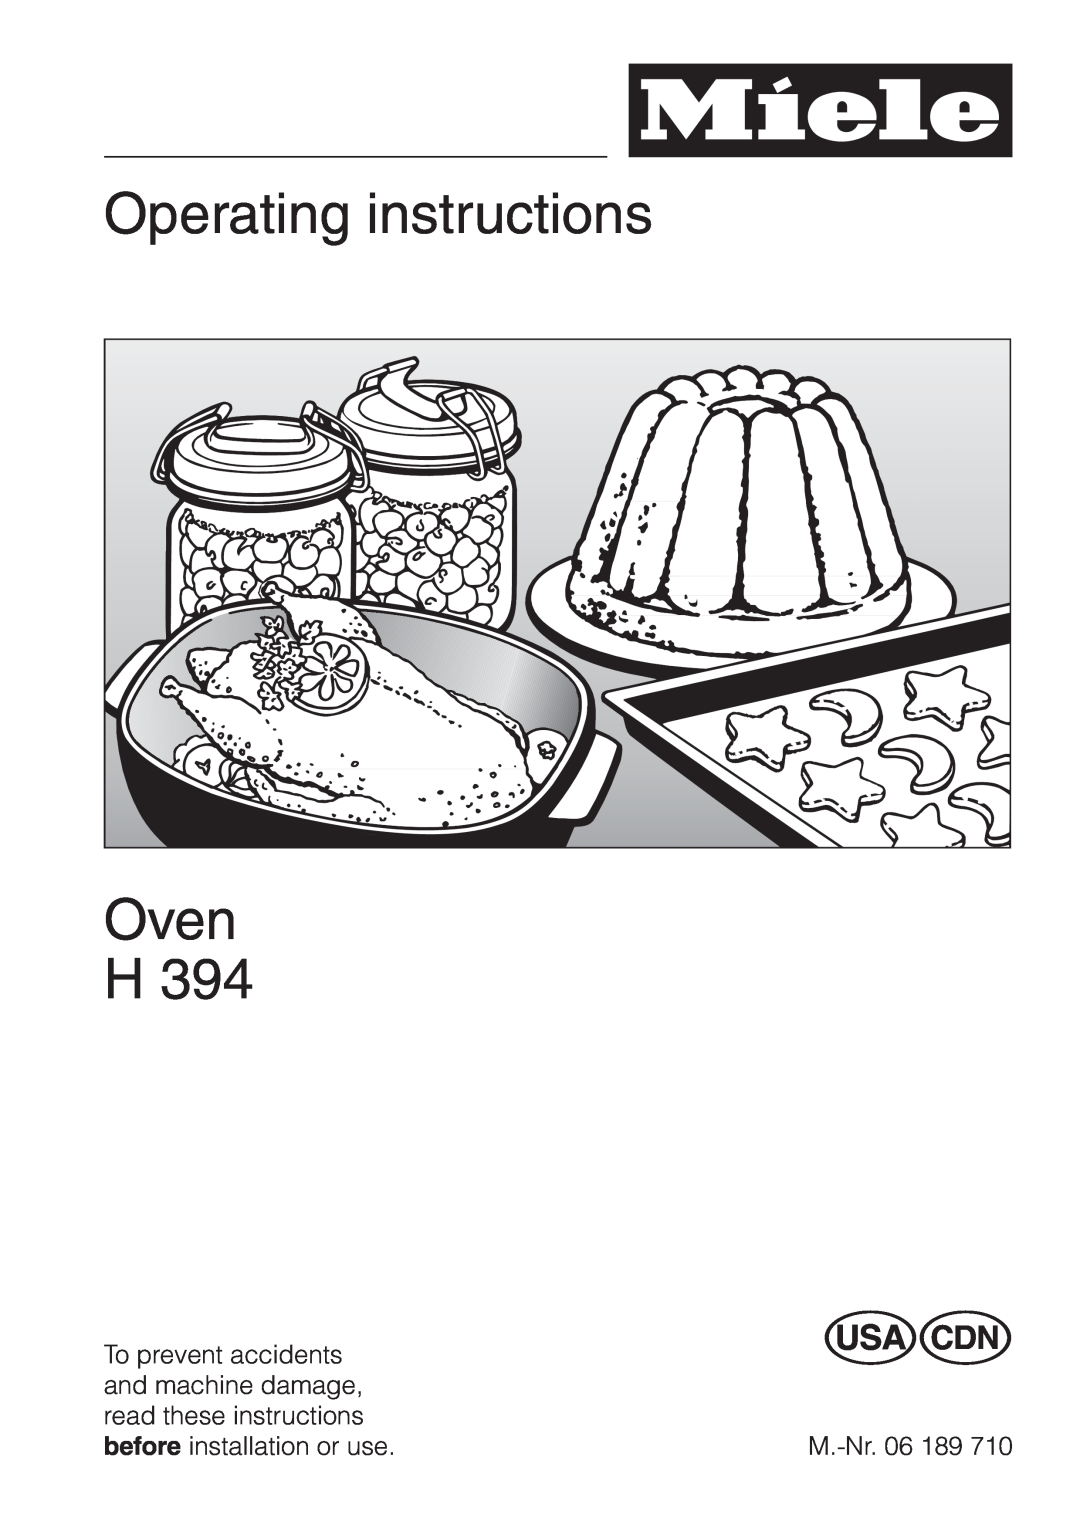 Miele H 394 manual Operating instructions, Oven 